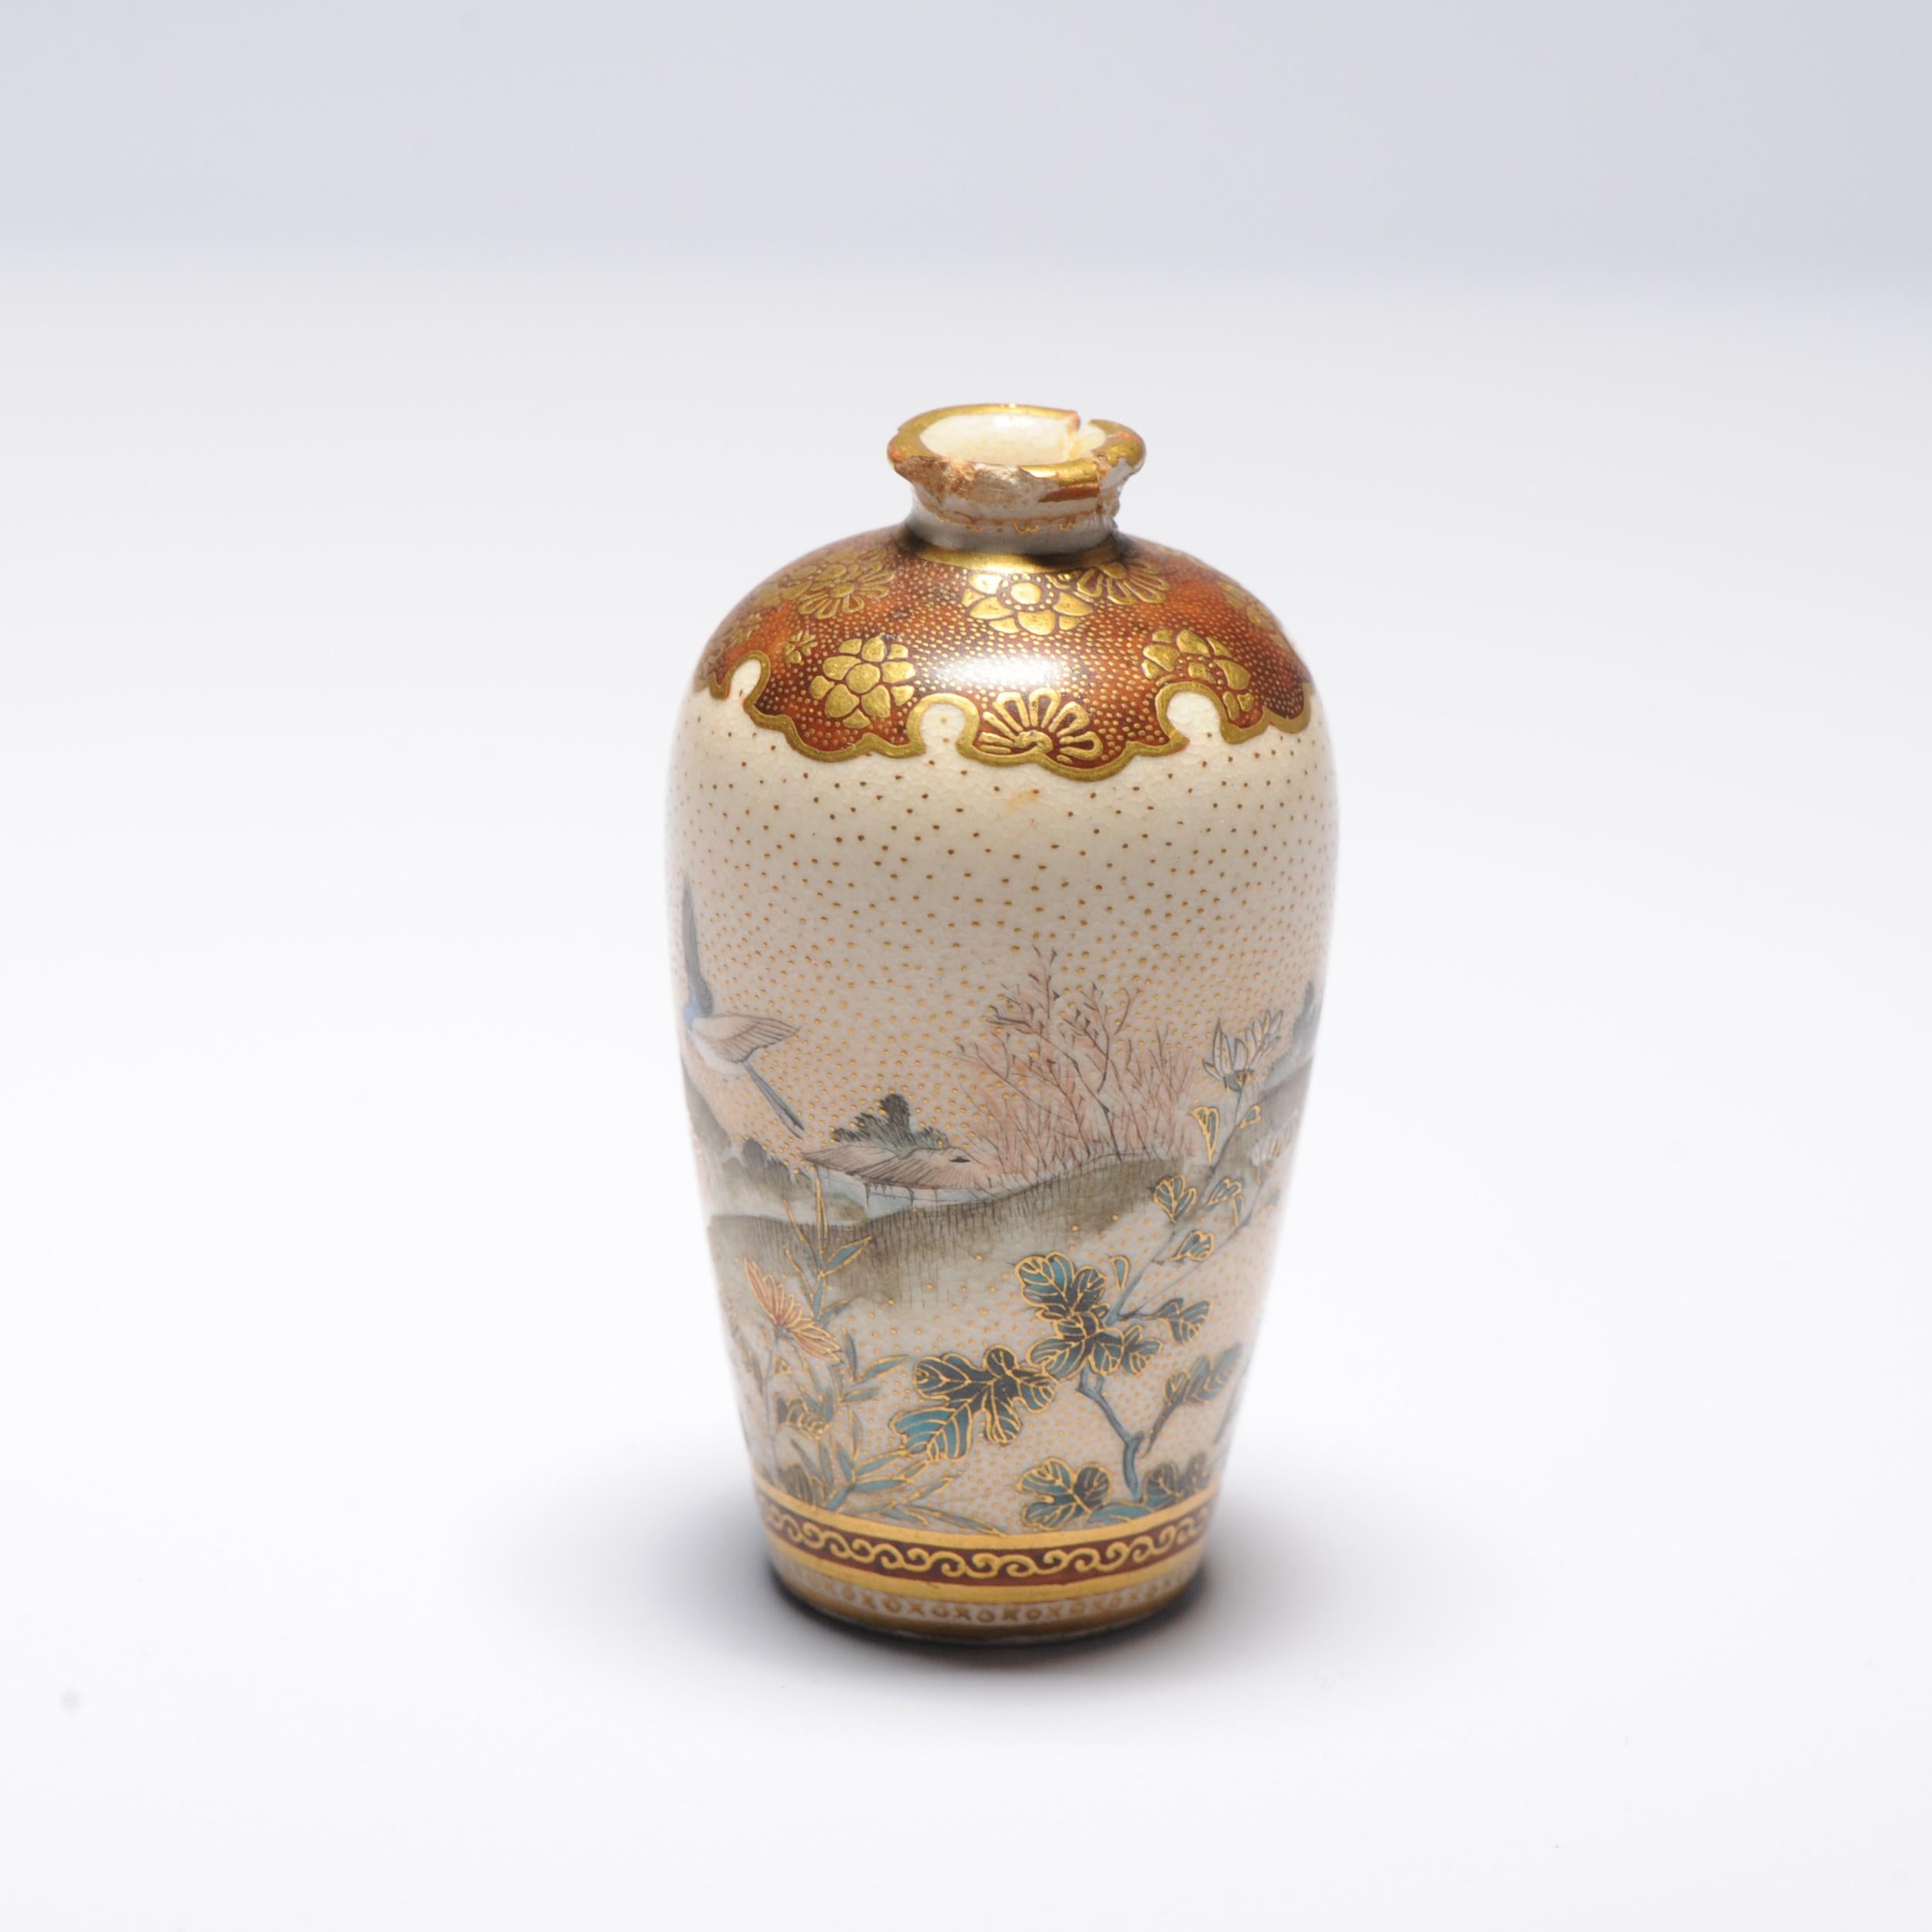 Description

Sharing with you is this nice satsuma miniature vase decorated with birds in an mountainous landscape scene.

Condition

Overall Condition missing chips and restuck chip to rim. Size 63mm high

Period

Meiji Periode